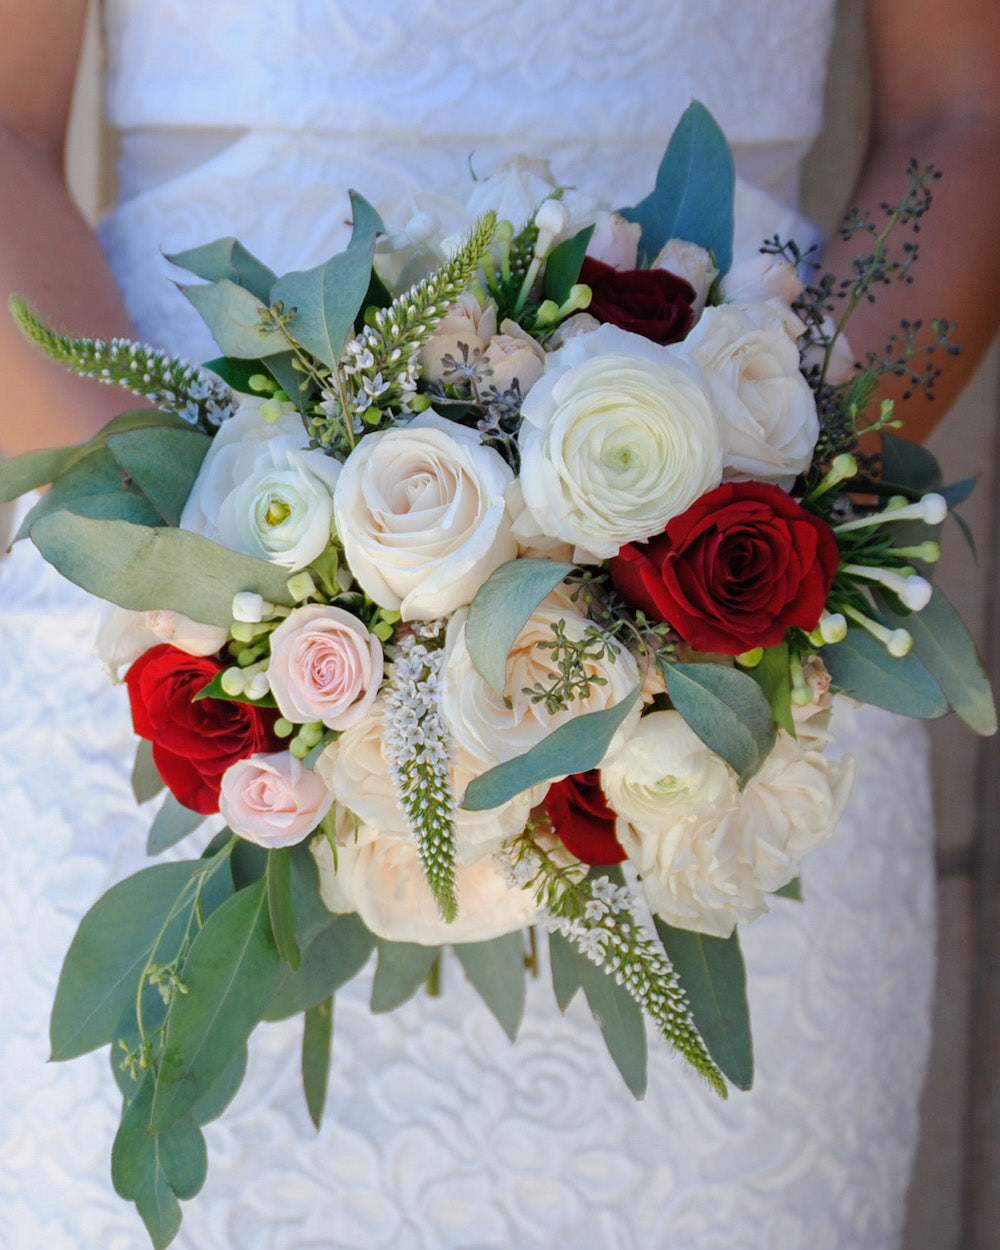 white and red bridal bouquet